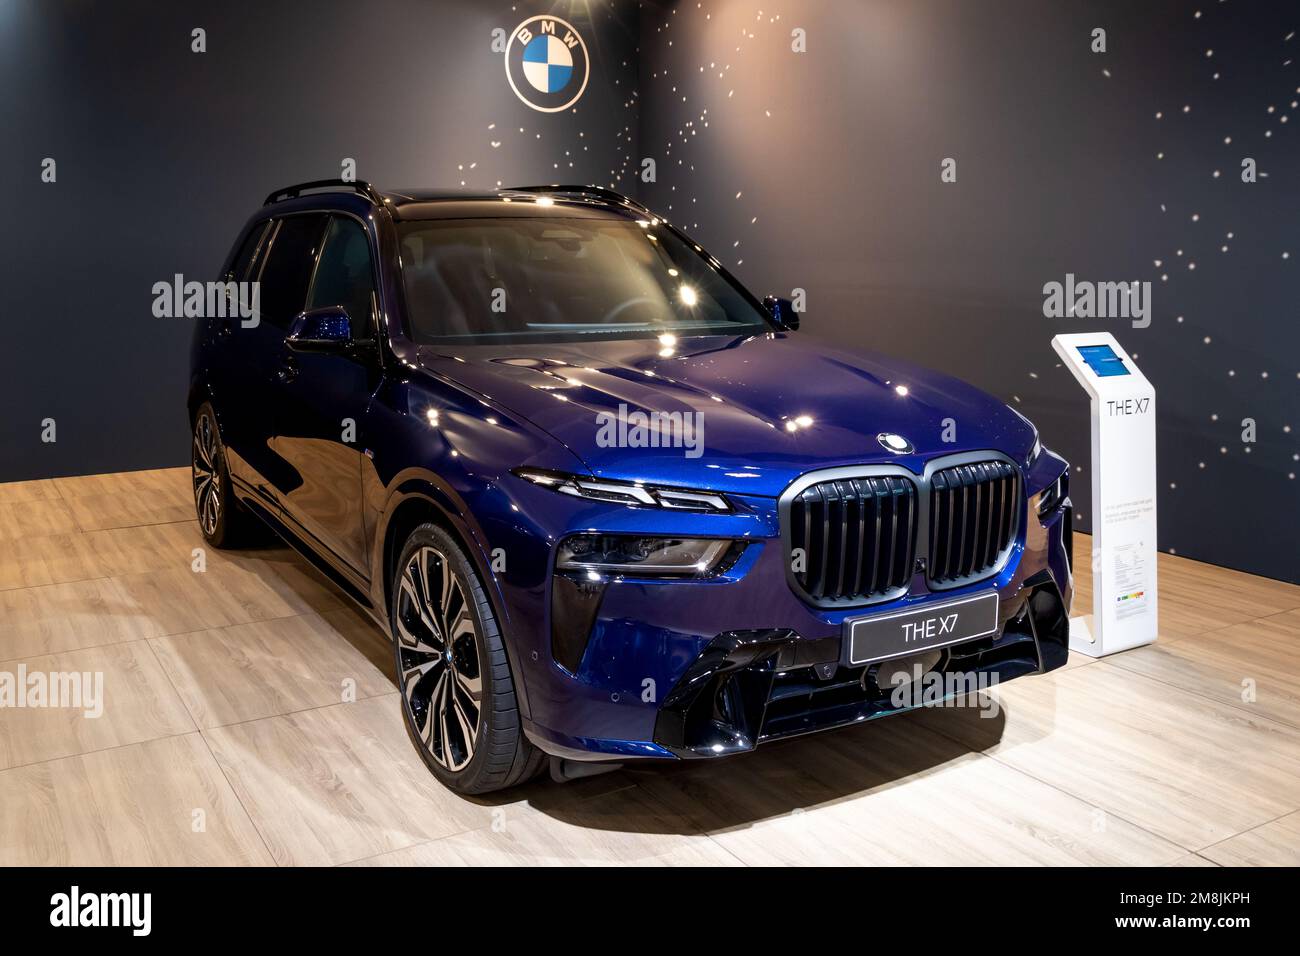 BMW X7 (G07) luxury SUV car presented at the Brussels Autosalon